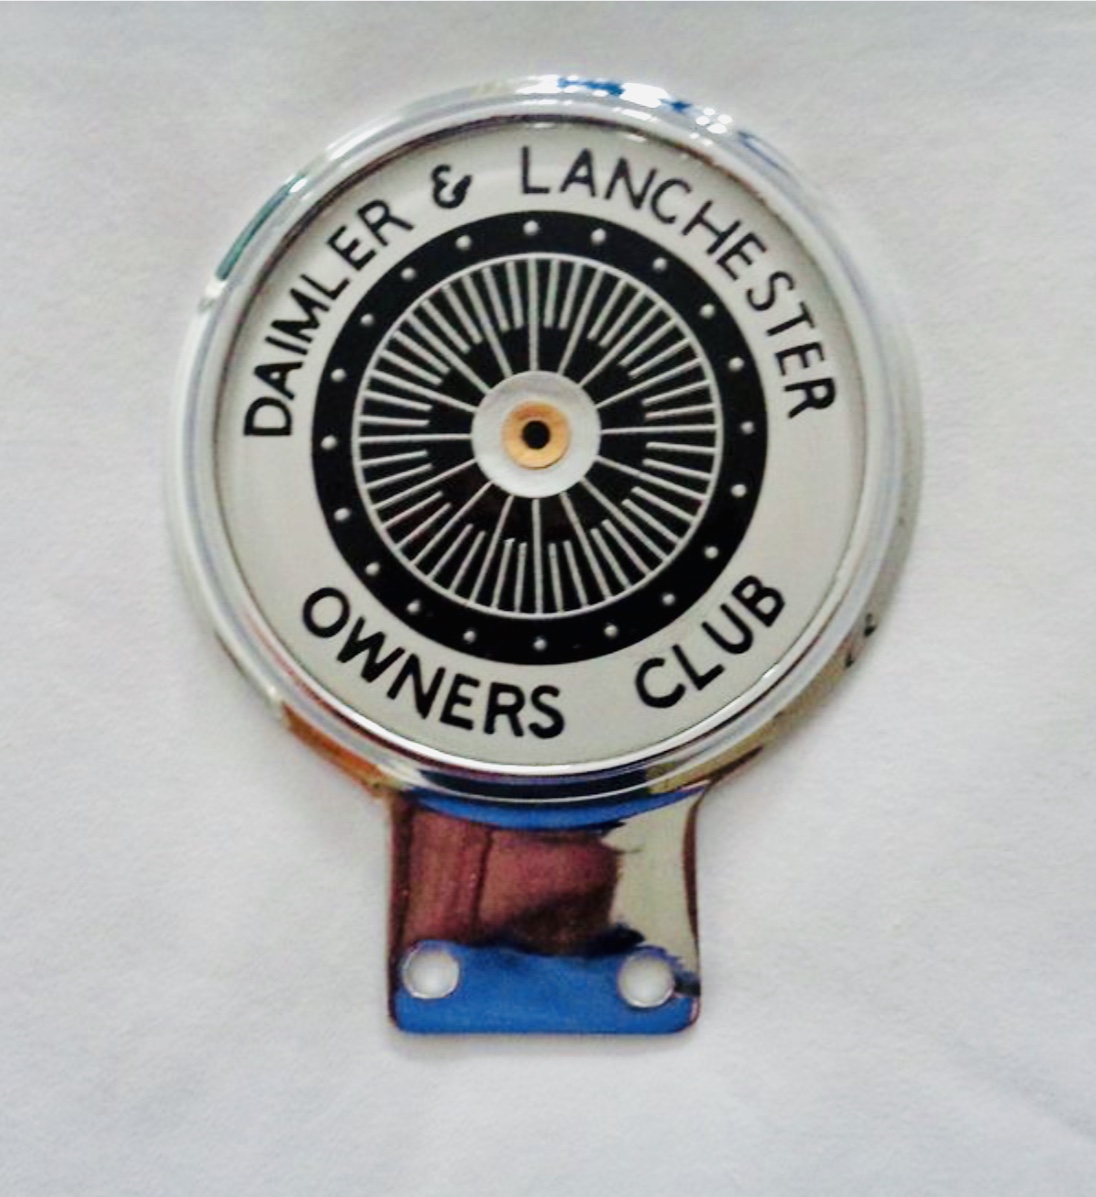 Daimler and Lanchester Owners'